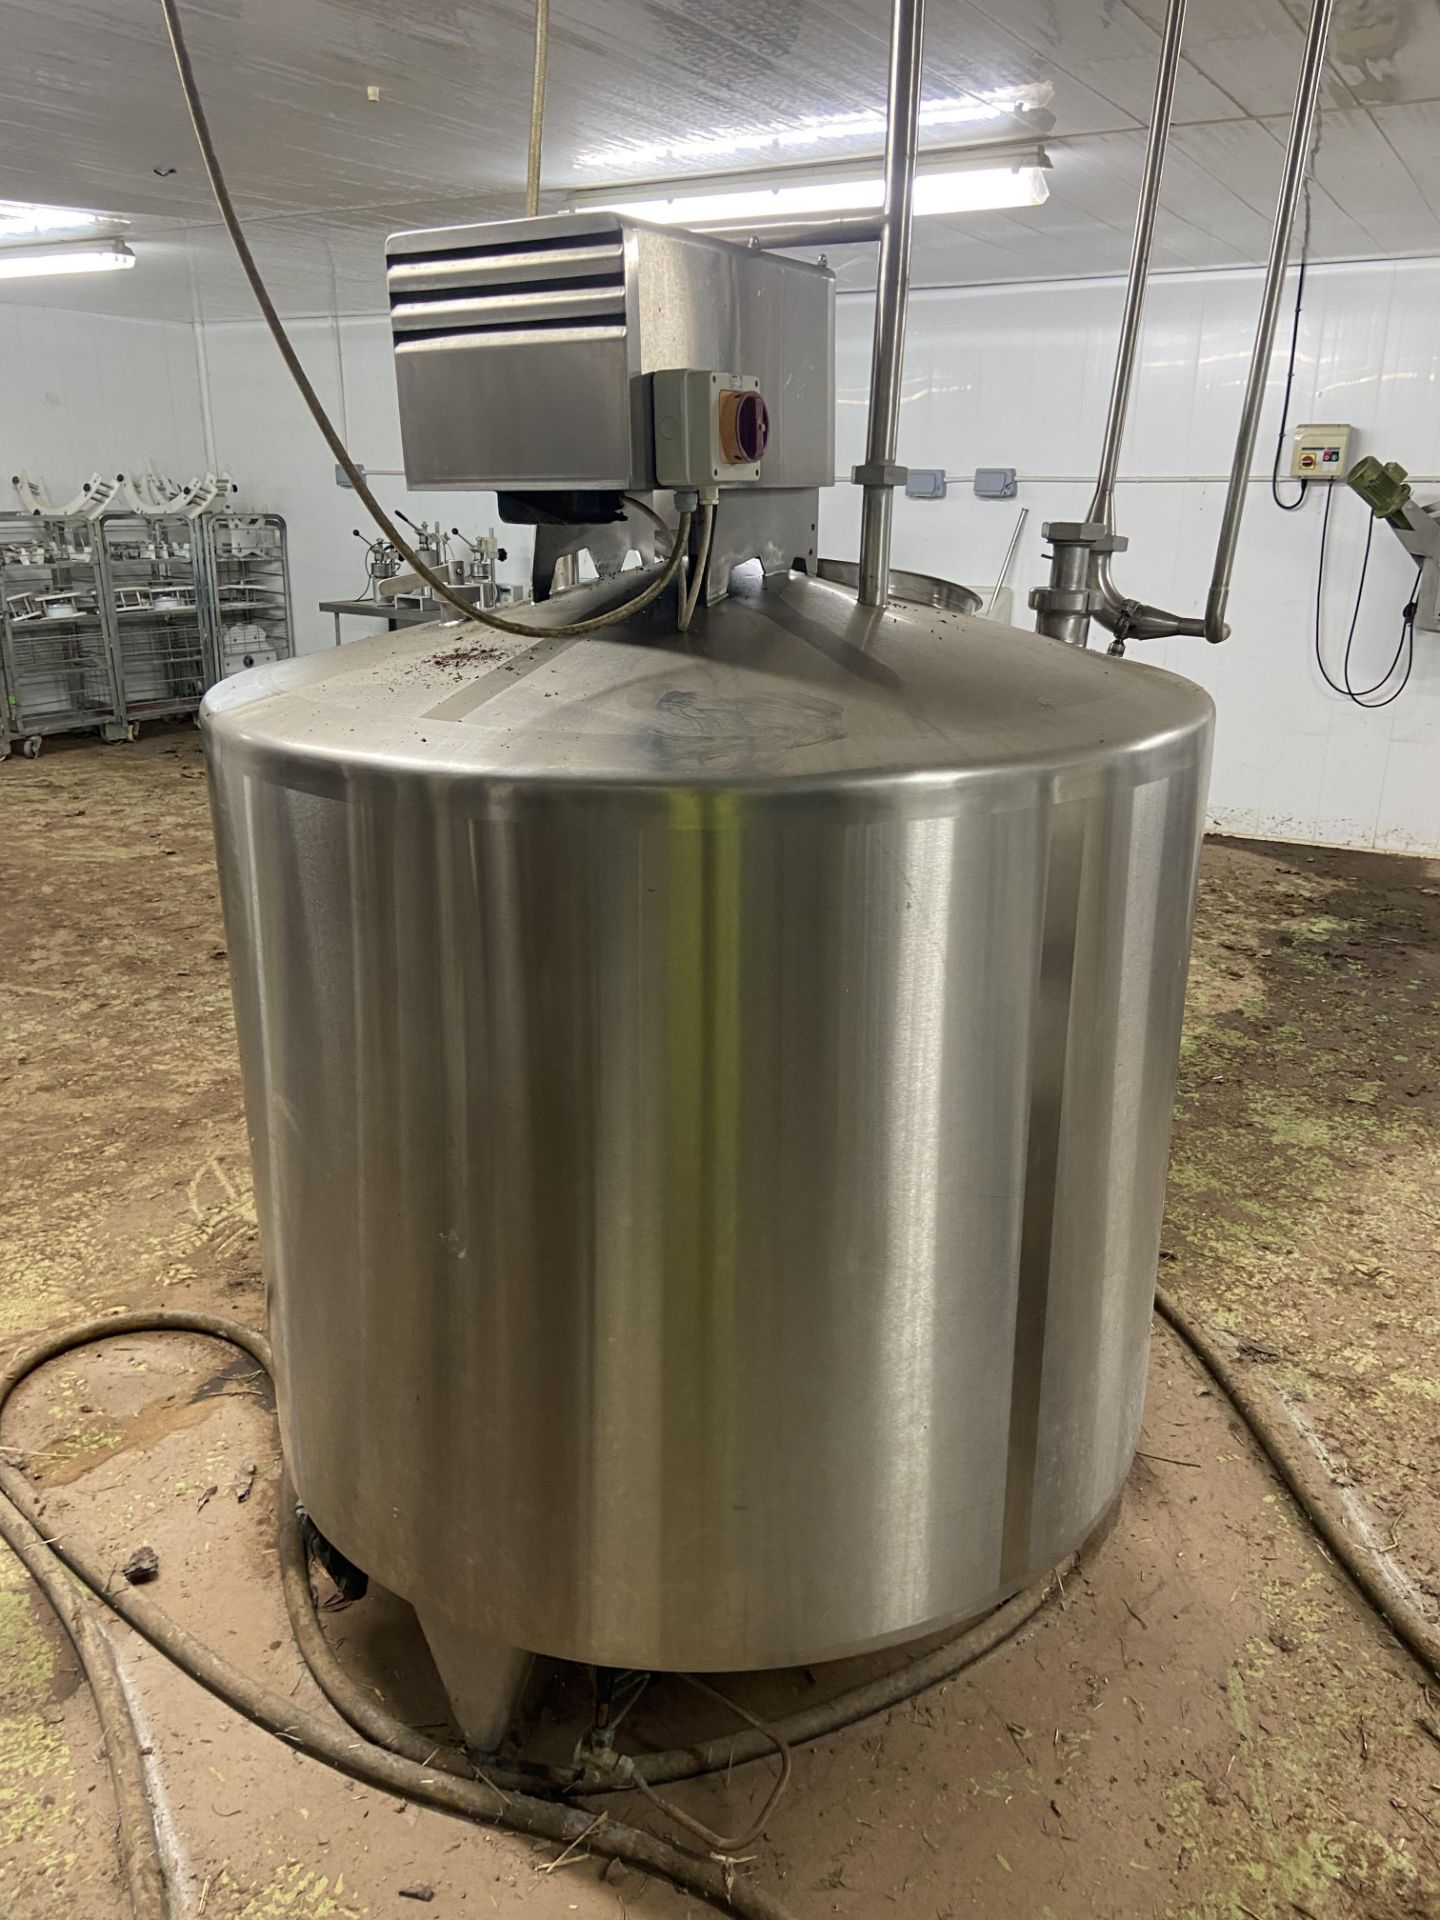 STAINLESS STEEL 1000 litre CREAM MIXING VESSEL, serial no. 881531, approx. 1.3m x 1.1m deep, with - Image 3 of 6